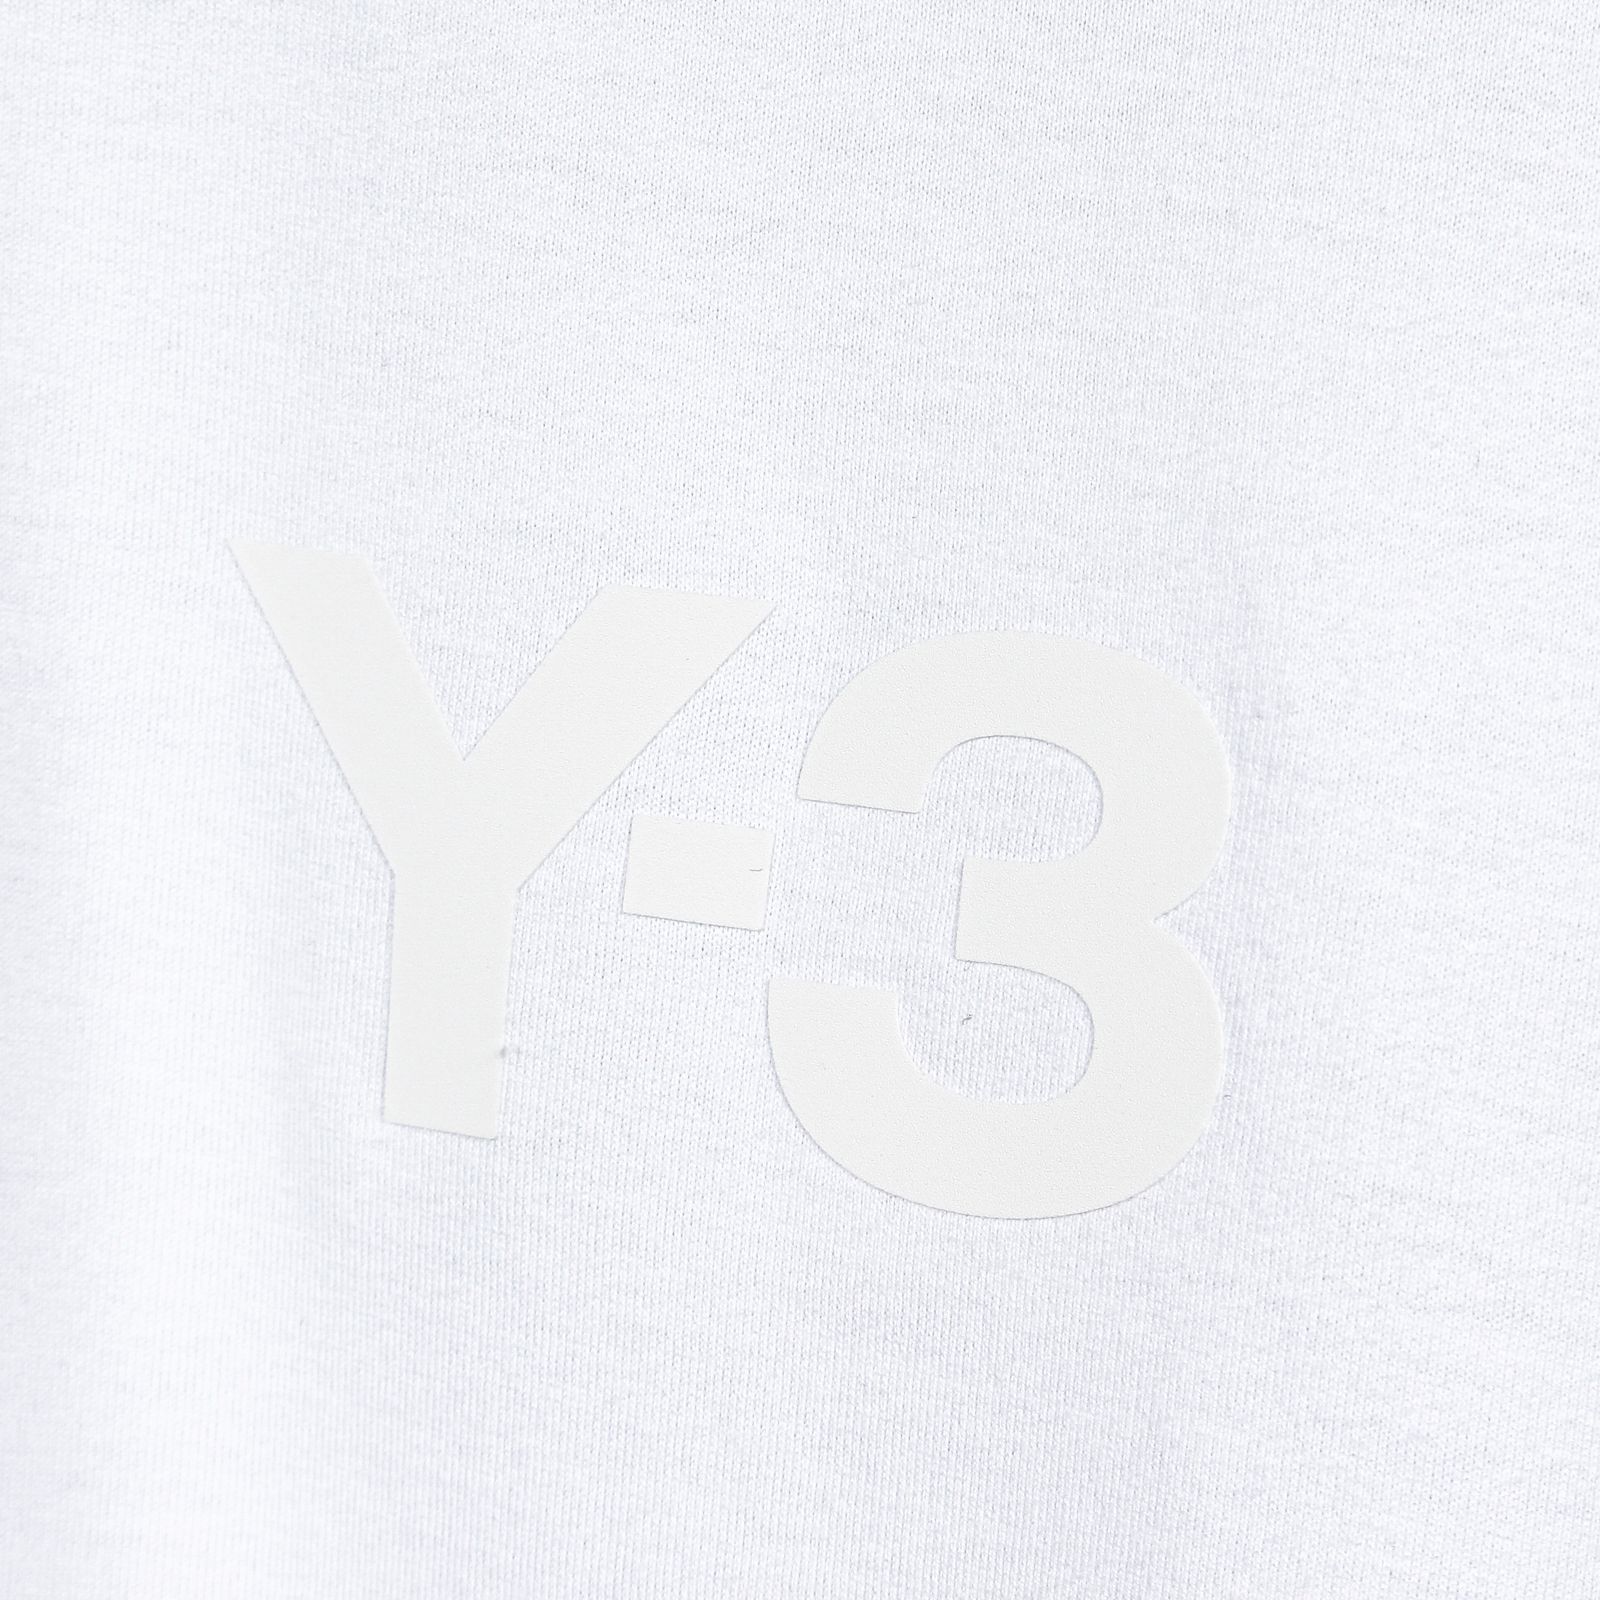 Y-3 - M CLASSIC CHEST LOGO SS TEE / GV4115-ACCS21 | ALUBUS / RUFUS